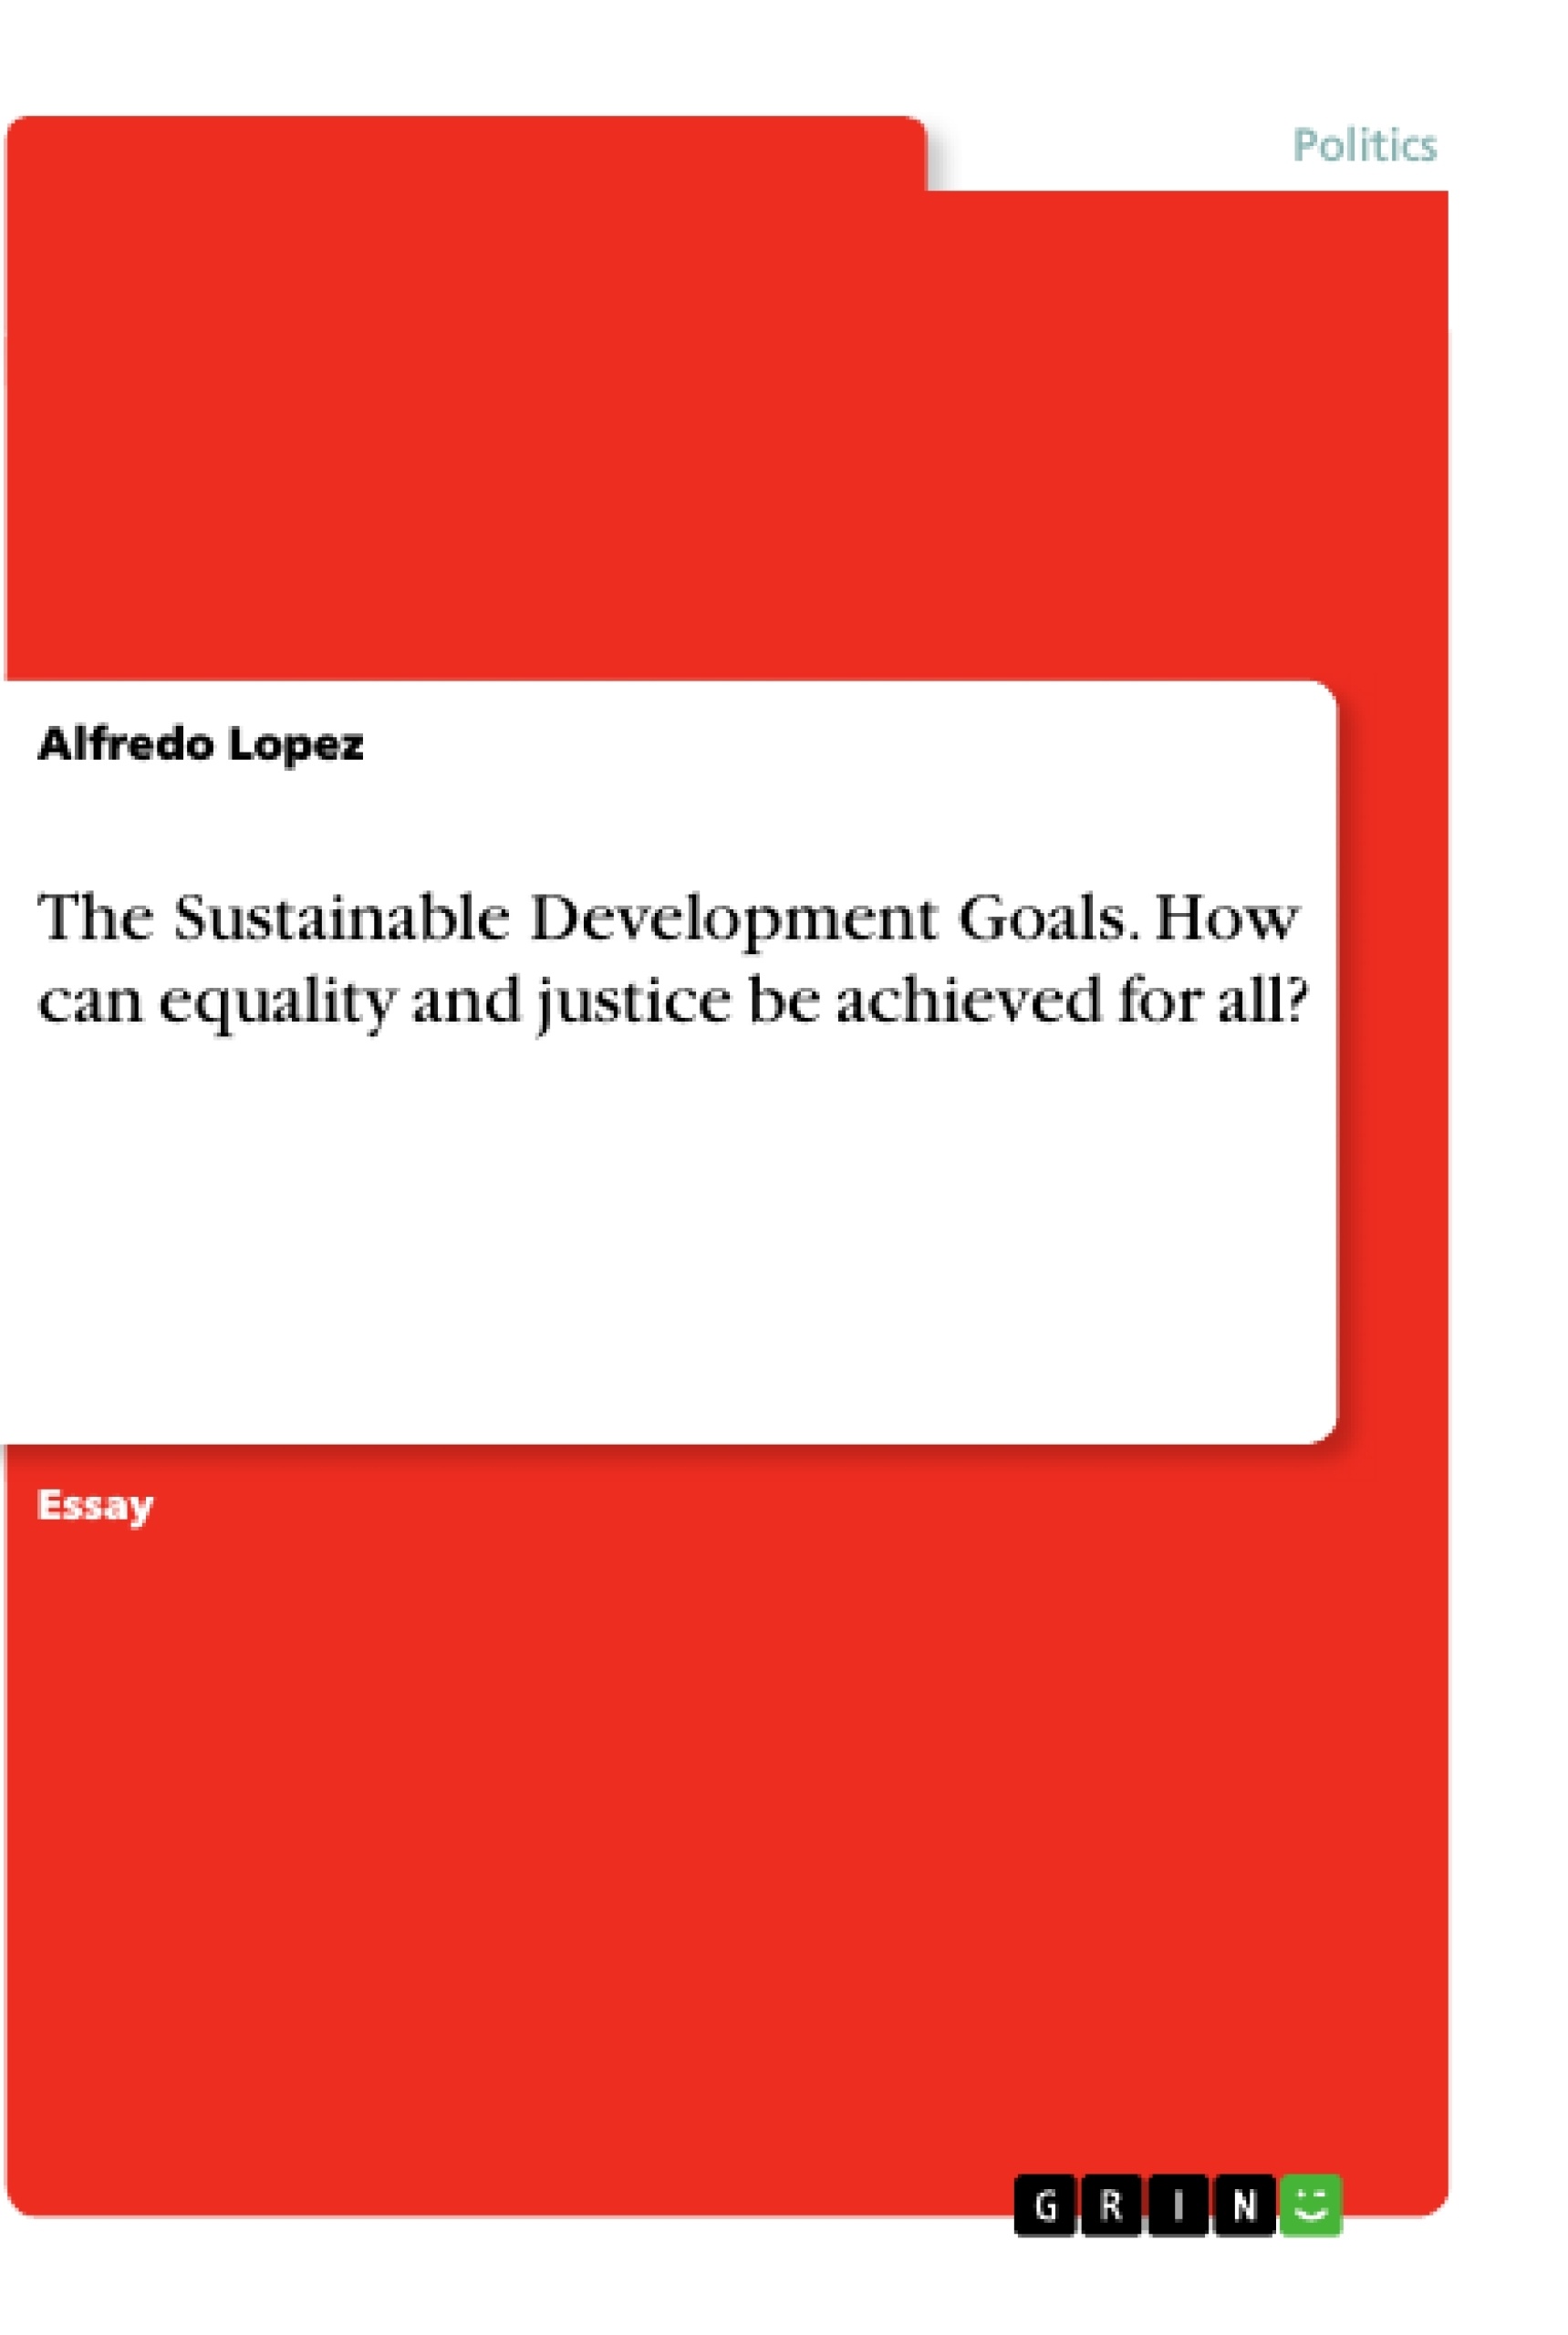 Título: The Sustainable Development Goals. How can equality and justice be achieved for all?